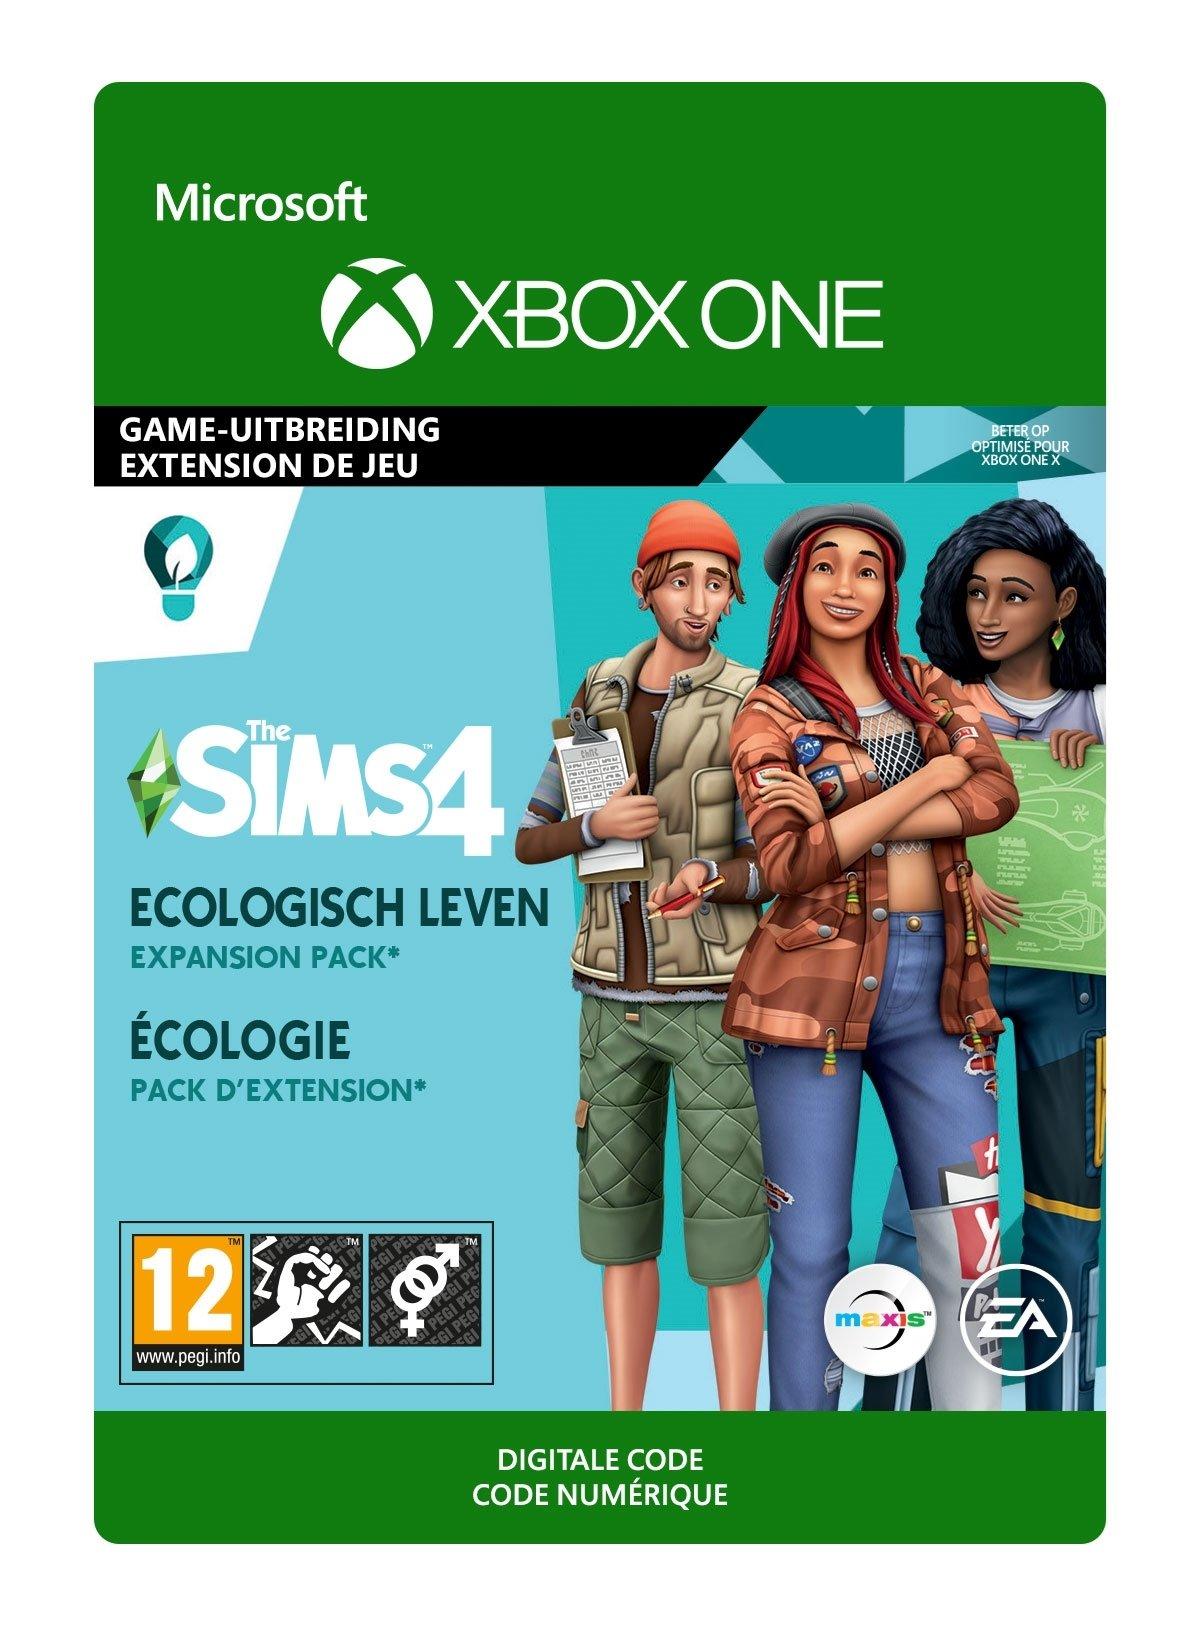 The Sims 4: Eco-Lifestyle - Xbox One - Add-on | 7D4-00558 (655387a6-7998-7244-b36d-295991053edf)